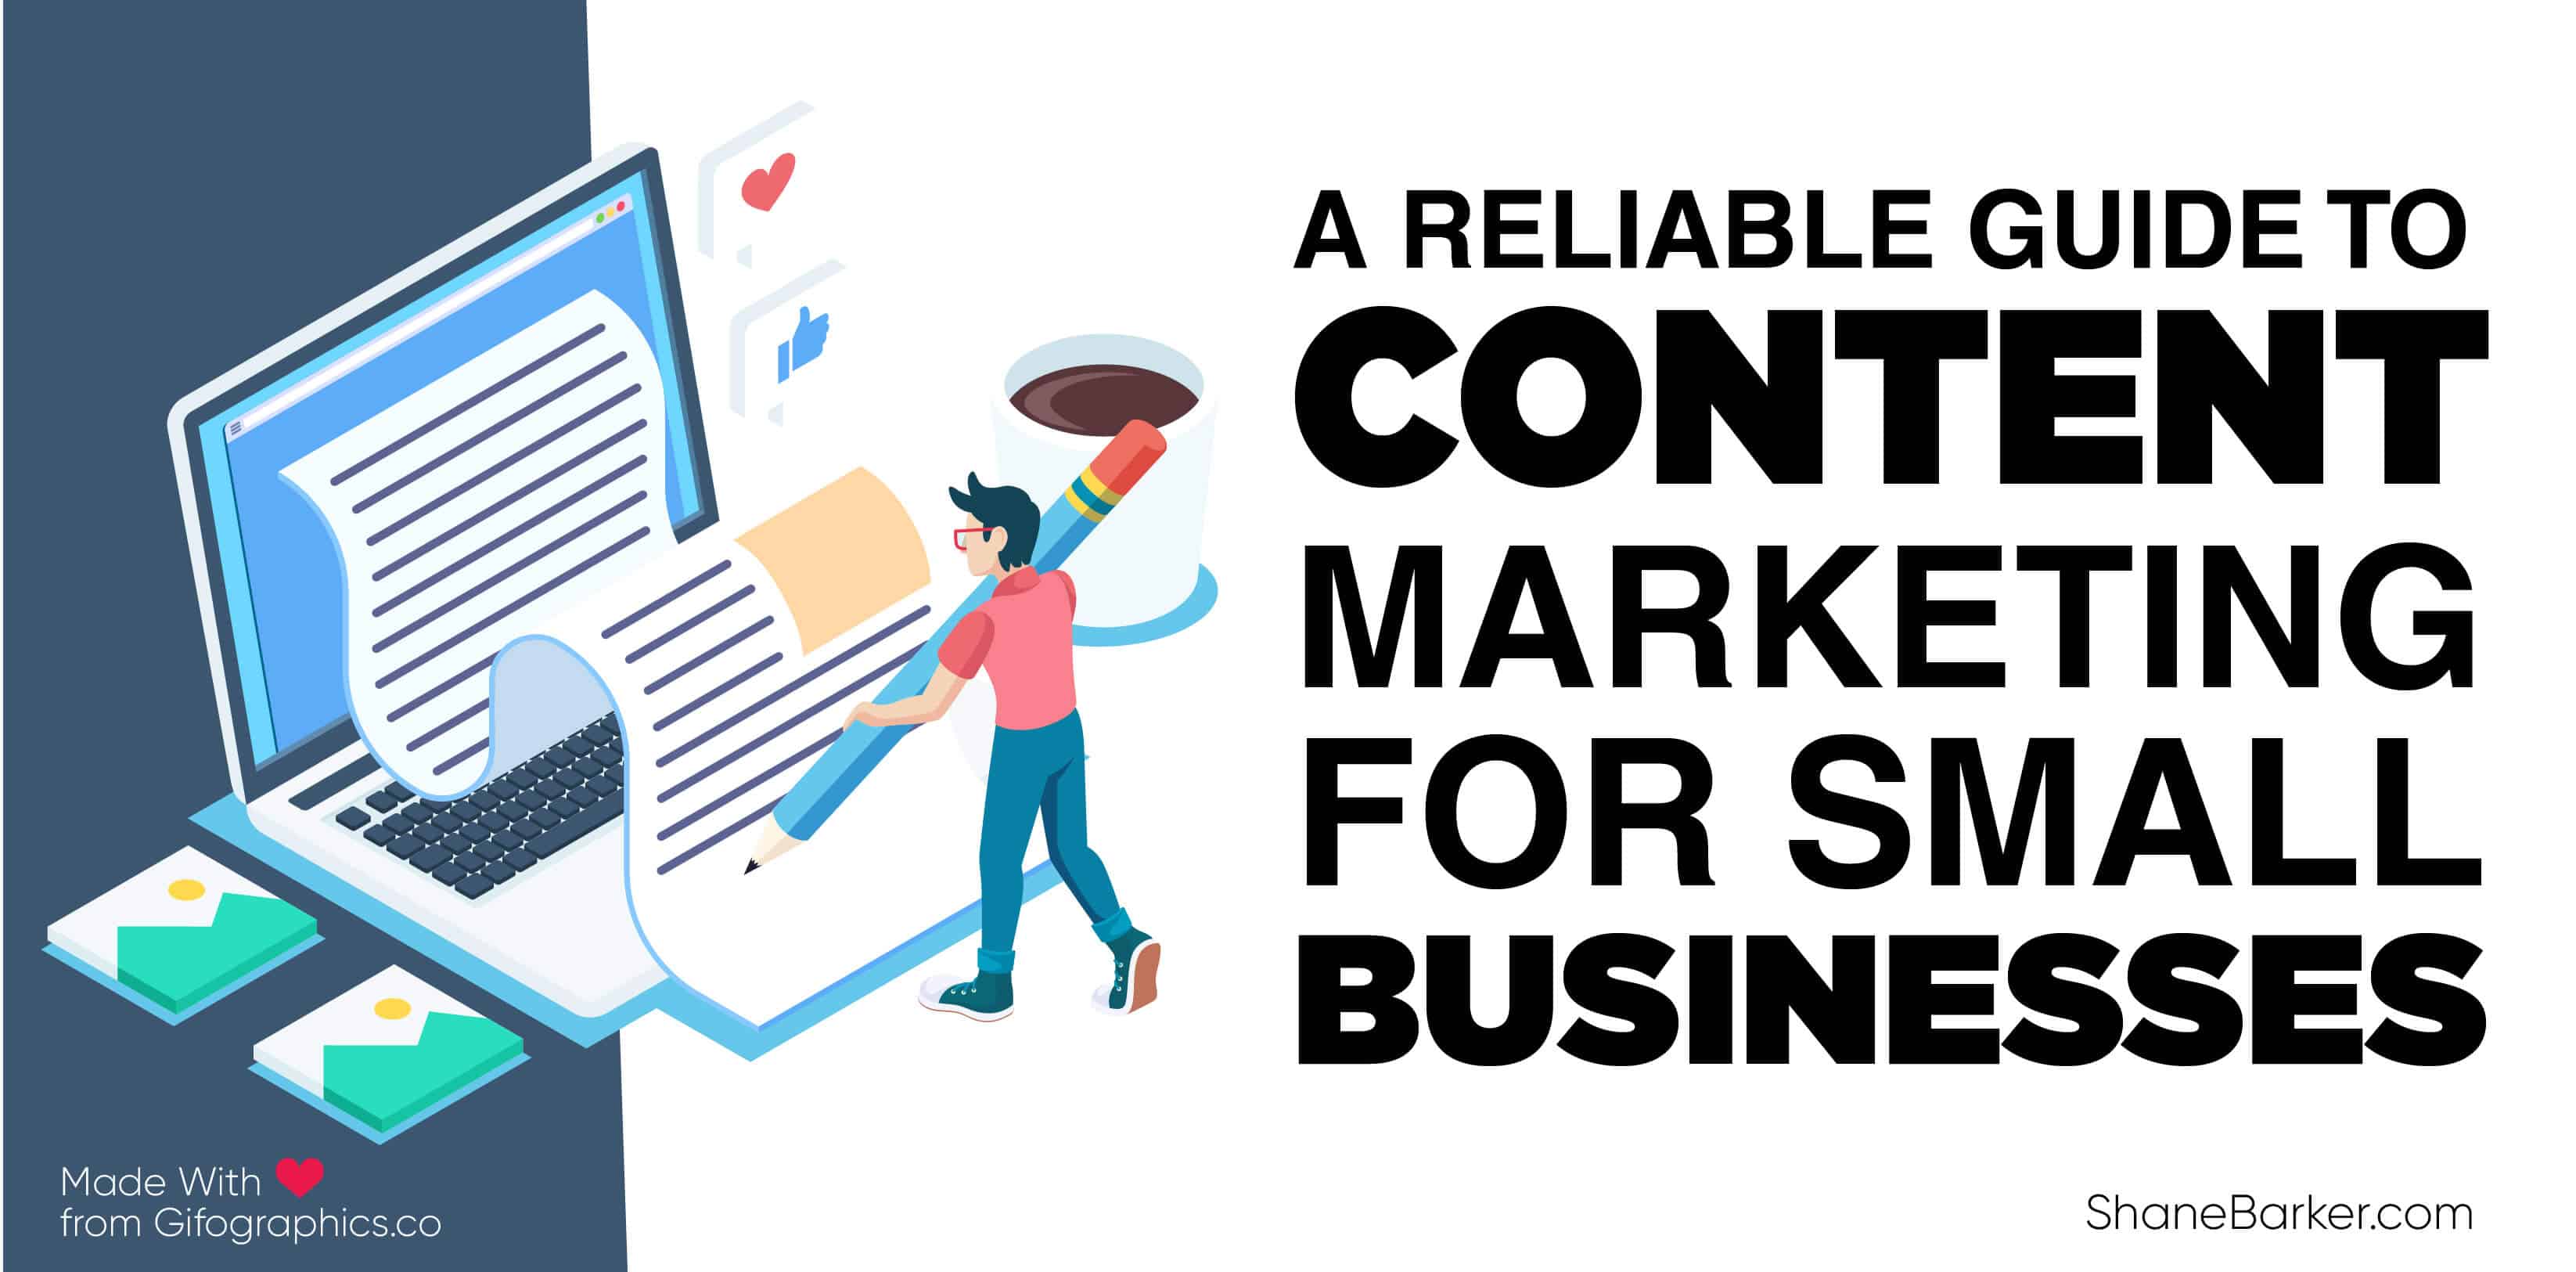 A Reliable Guide To Content Marketing For Small Businesses